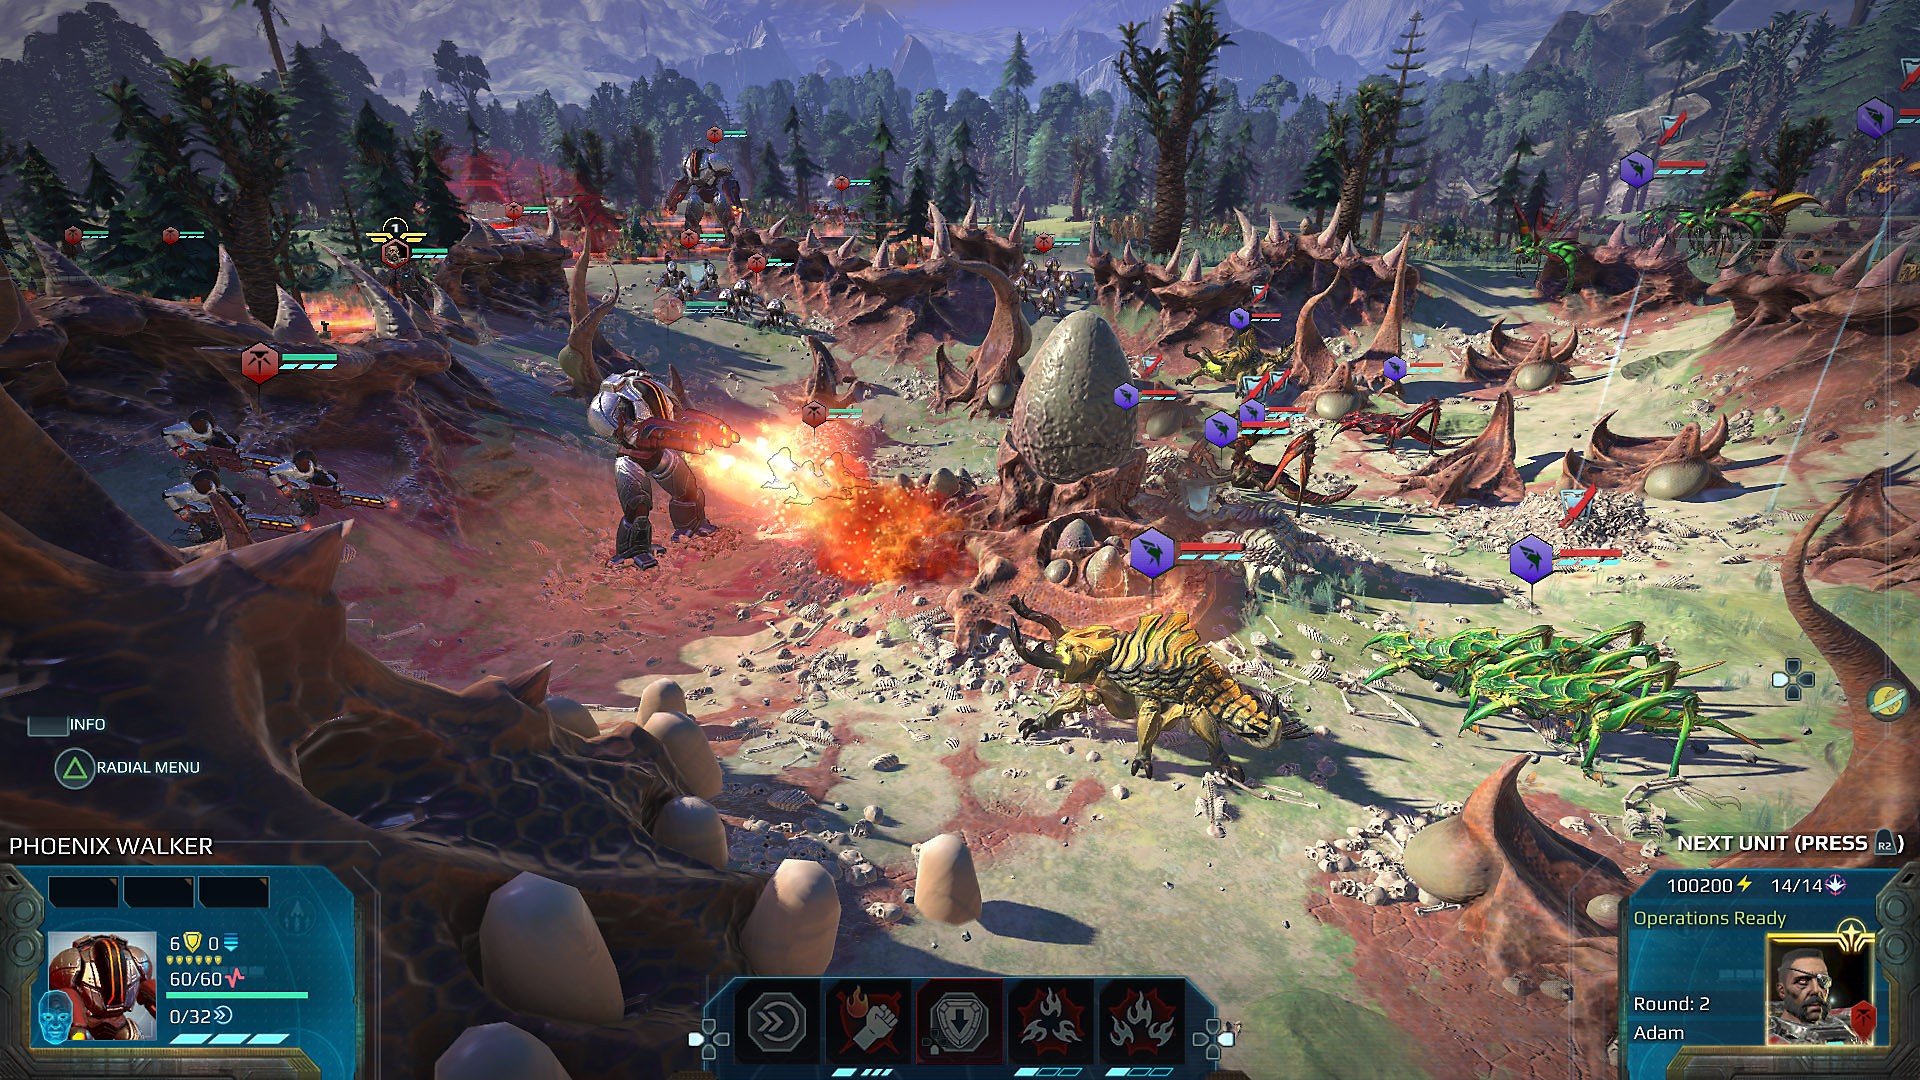 age of wonders planetfall download free